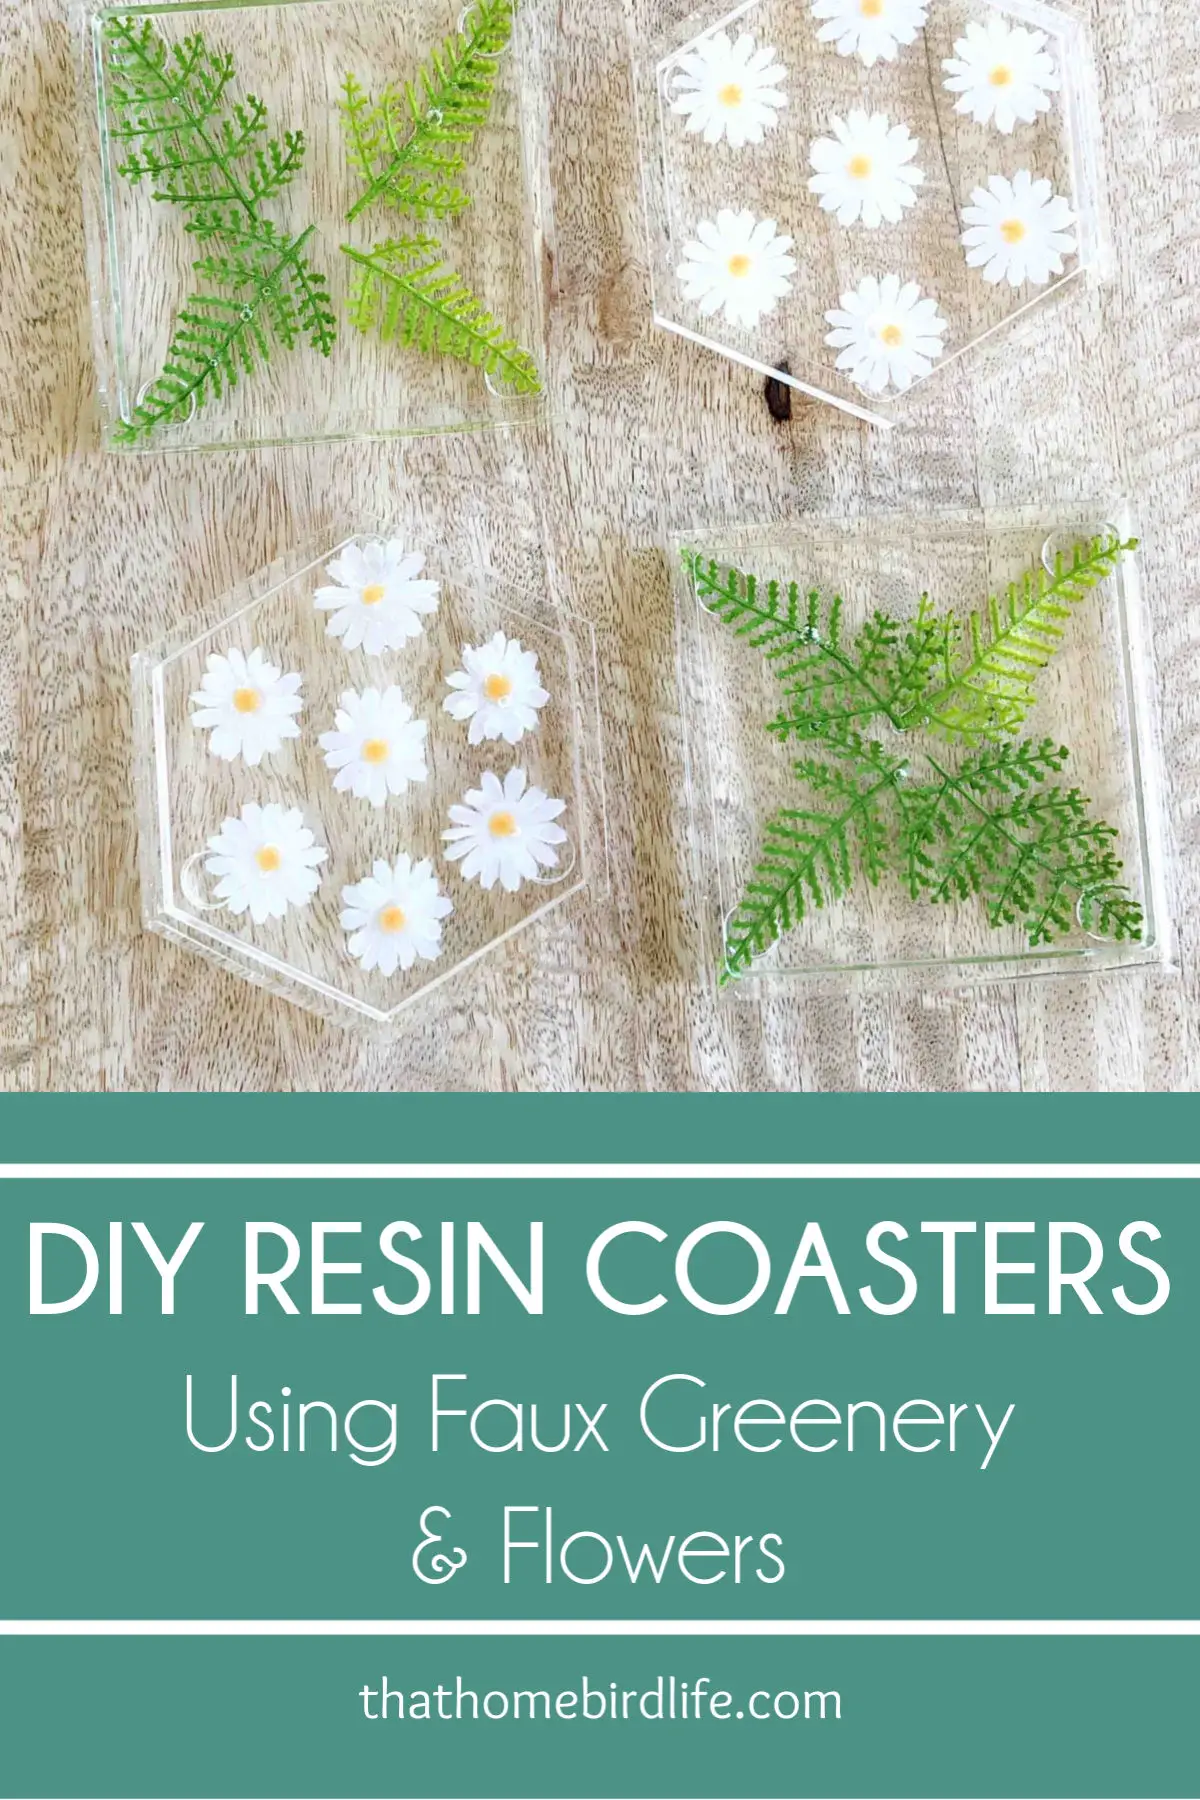 tutorial for craft resin coasters